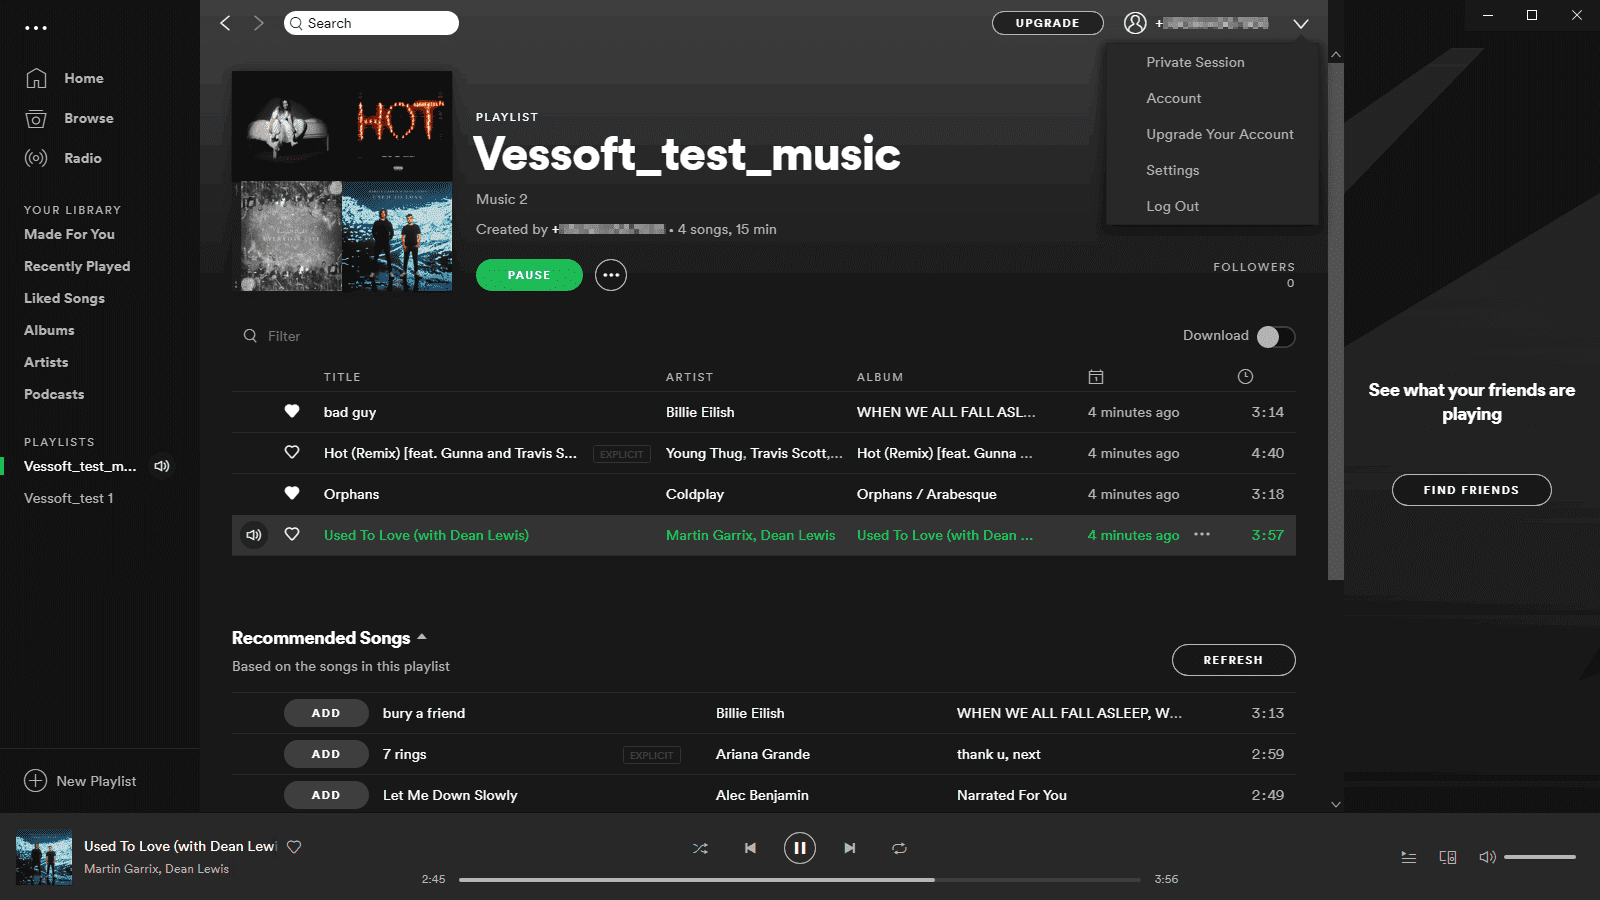 download the last version for windows Spotify 1.2.13.661